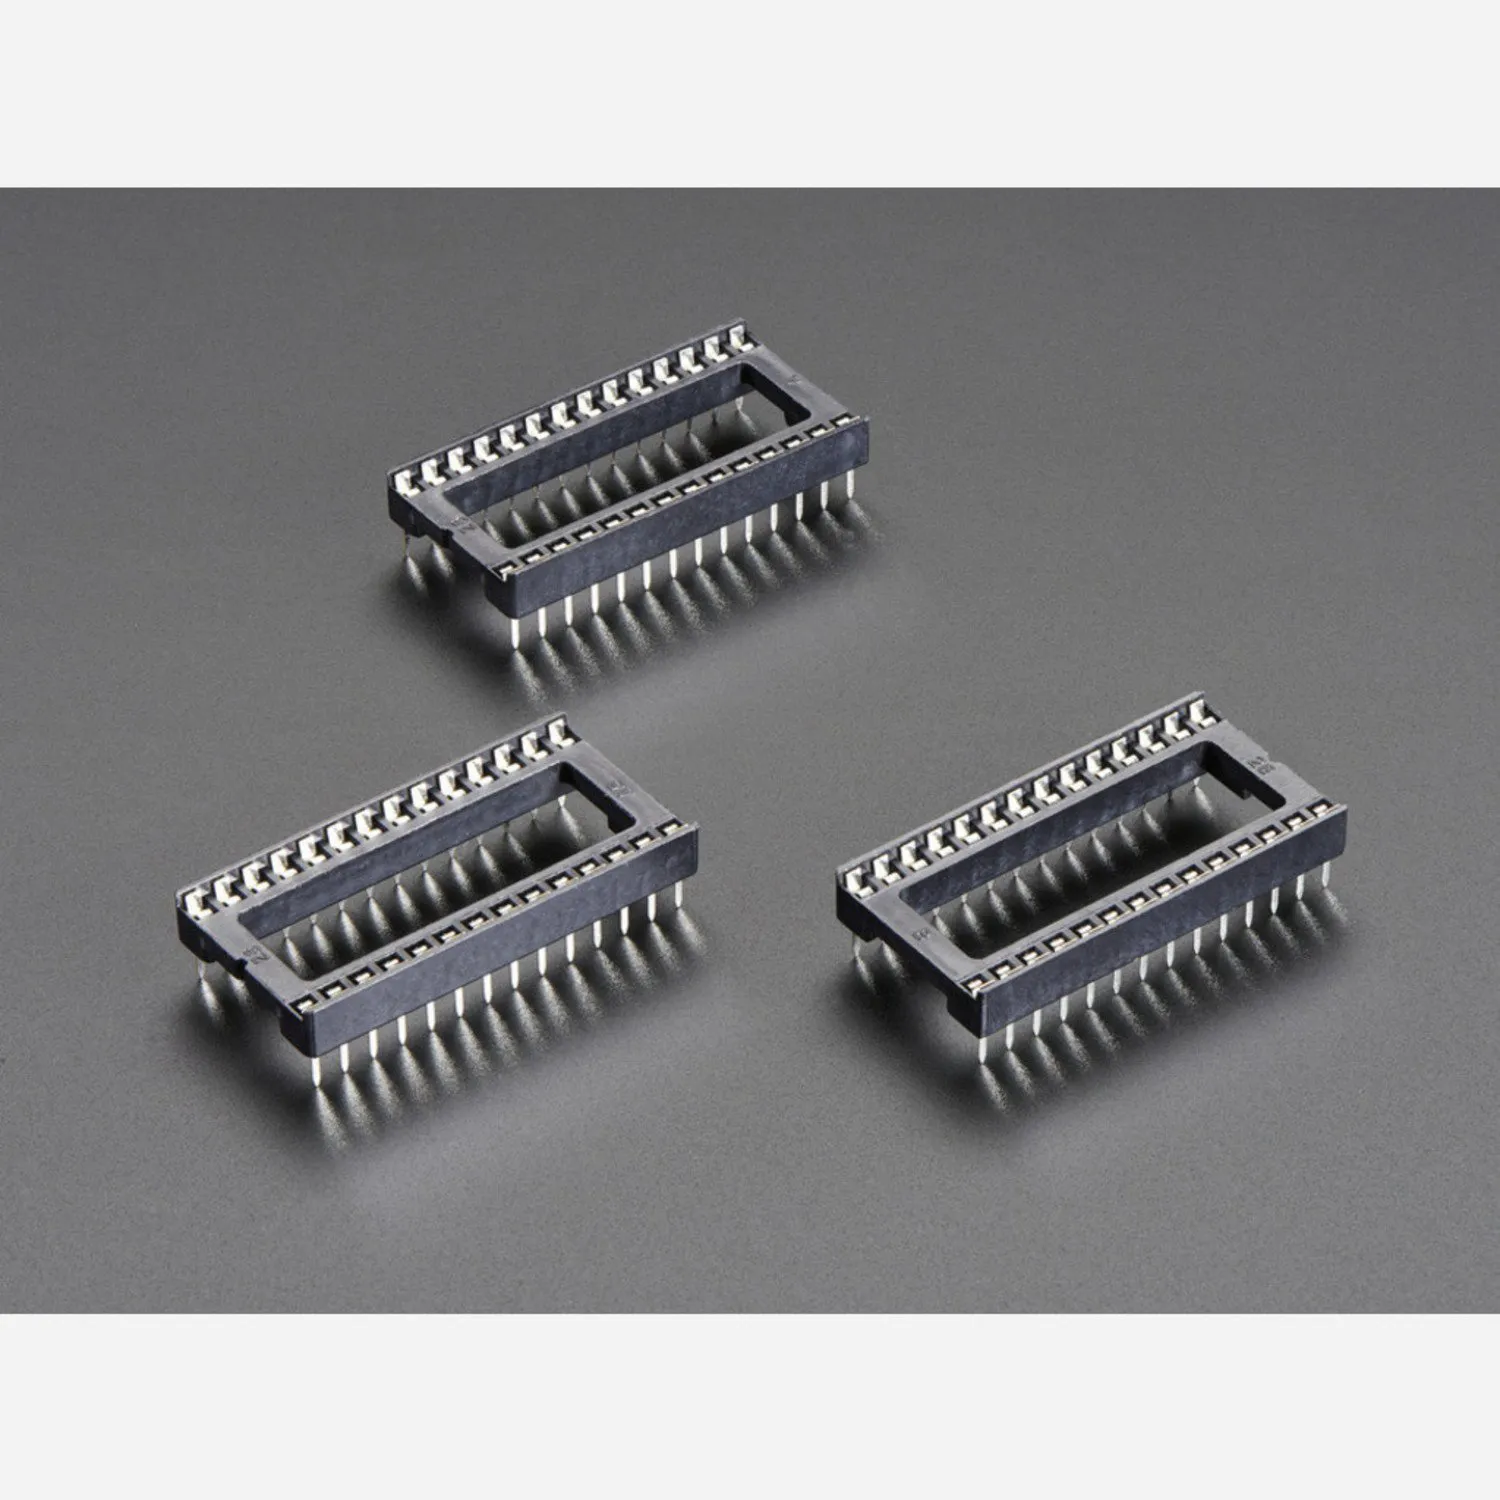 Photo of IC Socket - for 28-pin 0.6 Chips - Pack of 3